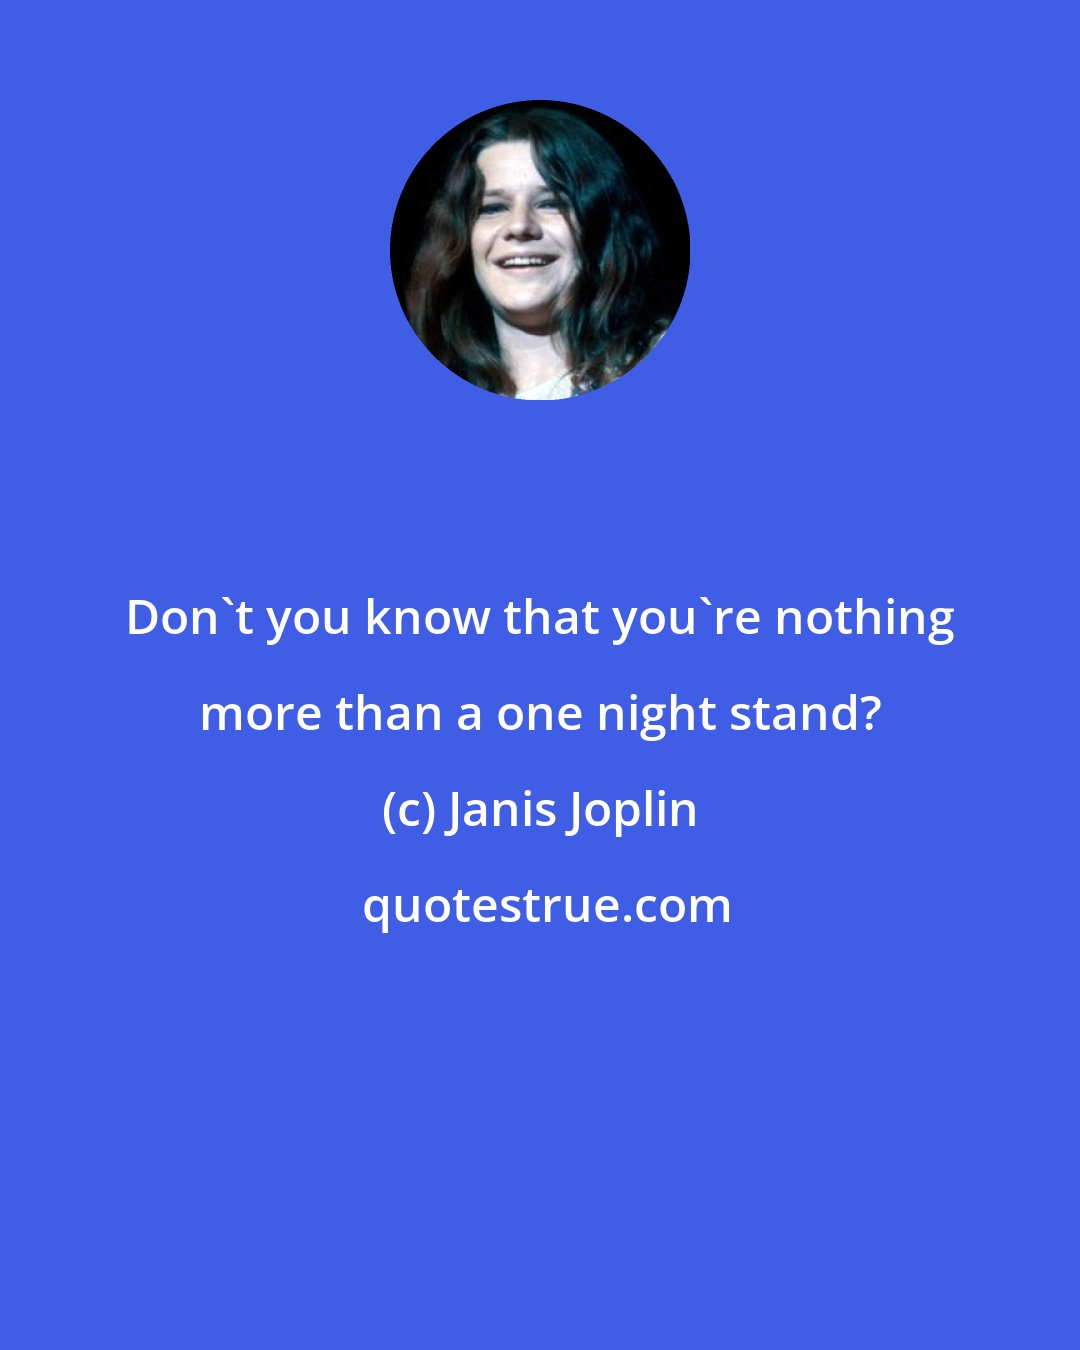 Janis Joplin: Don't you know that you're nothing more than a one night stand?